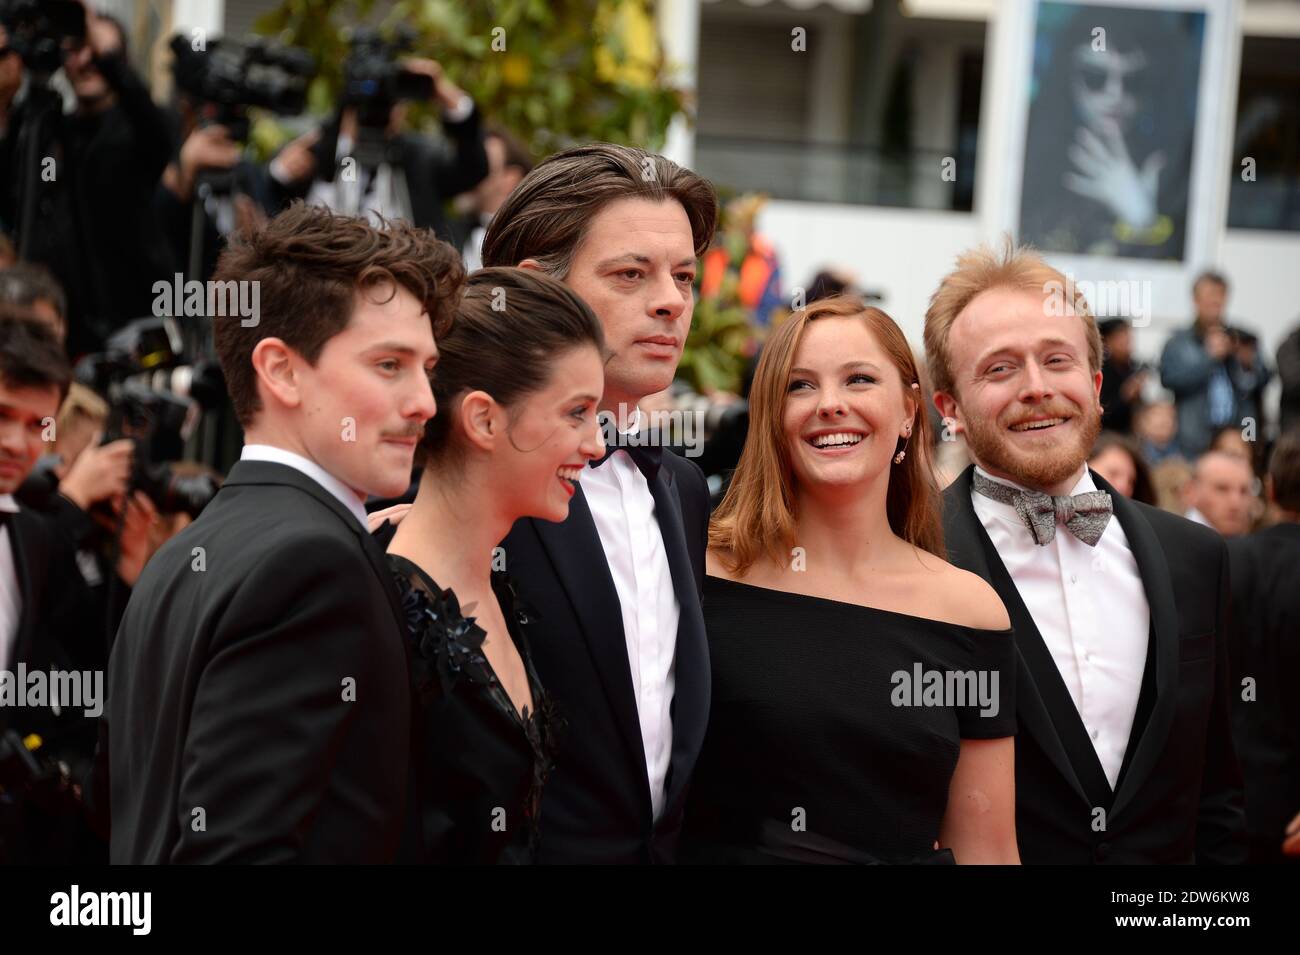 Benjamin Biolay and Barbara Probst arriving at the Palais Des Festivals for the screening of the film Foxcatcher as part of the 67th Cannes Film Festival at the in Cannes, France on May 19, 2014. Photo by Nicolas Briquet/ABACAPRESS.COM Stock Photo